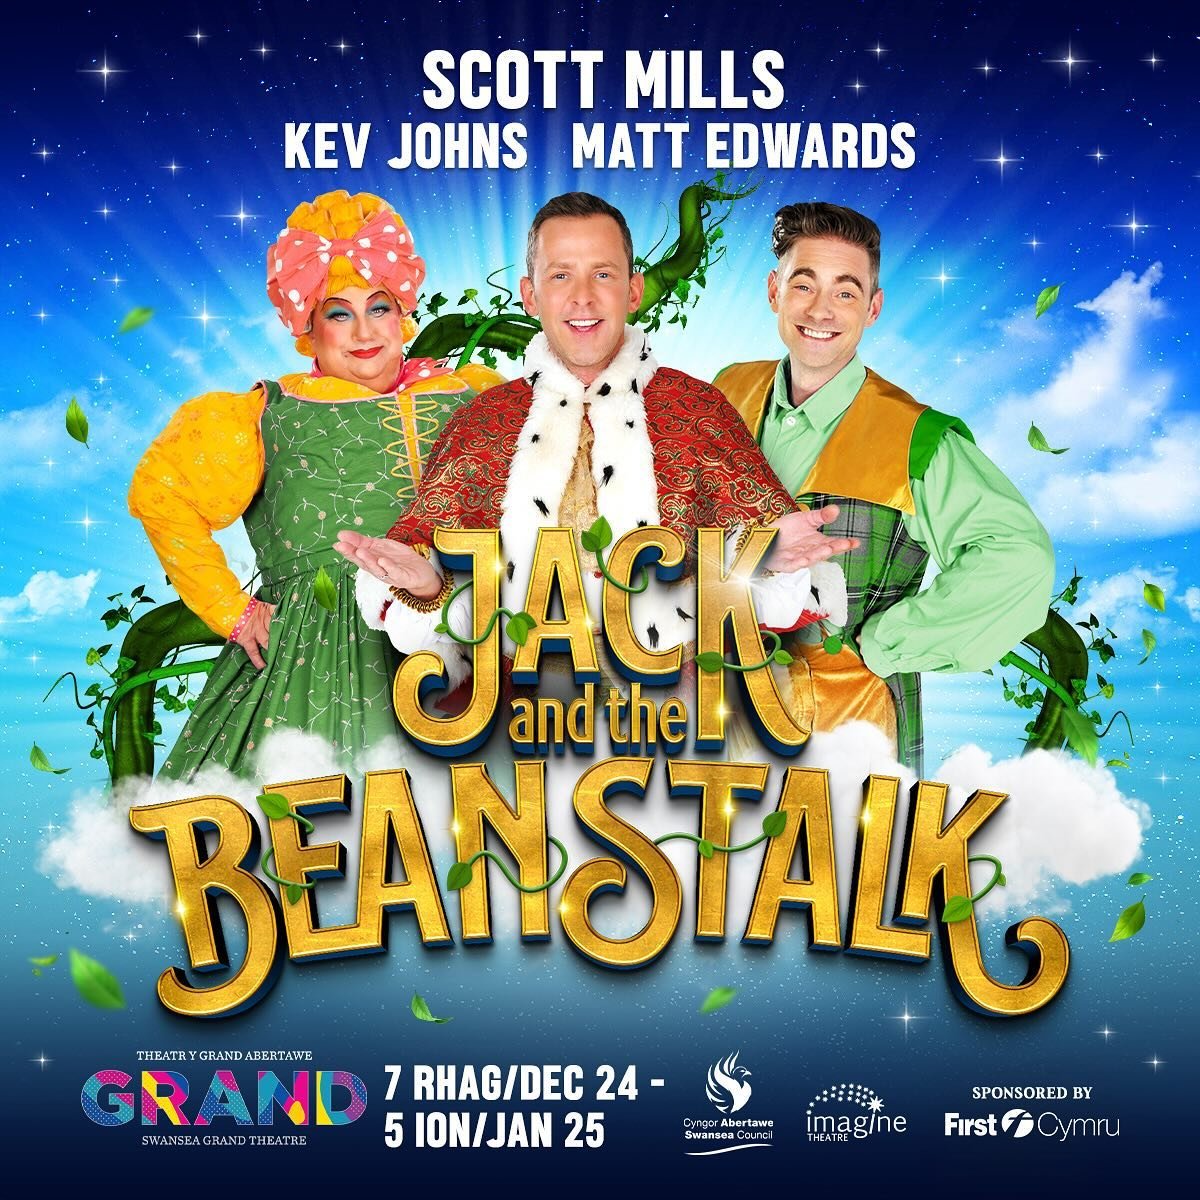 SCOTT MILLS will star in the magical pantomime Jack and the Beanstalk this Christmas at Swansea Grand Theatre, alongside previously announced Swansea legend Kev Johns and the hilarious Matt Edwards. Further and full casting to be announced soon. The 